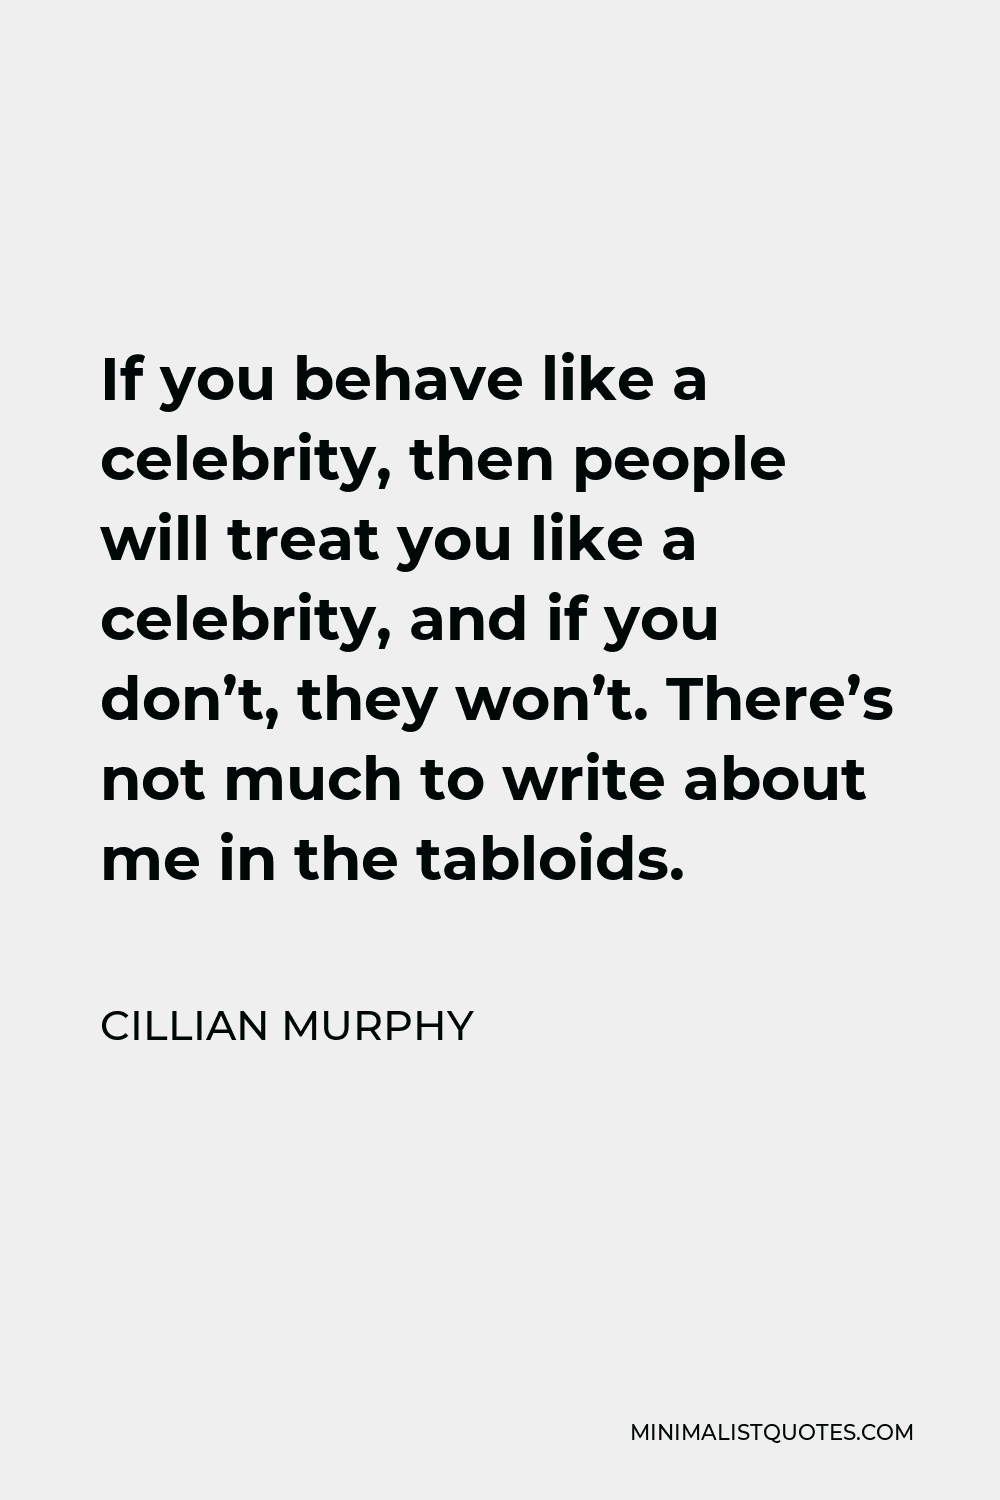 Cillian Murphy Quote - If you behave like a celebrity, then people will treat you like a celebrity, and if you don’t, they won’t. There’s not much to write about me in the tabloids.